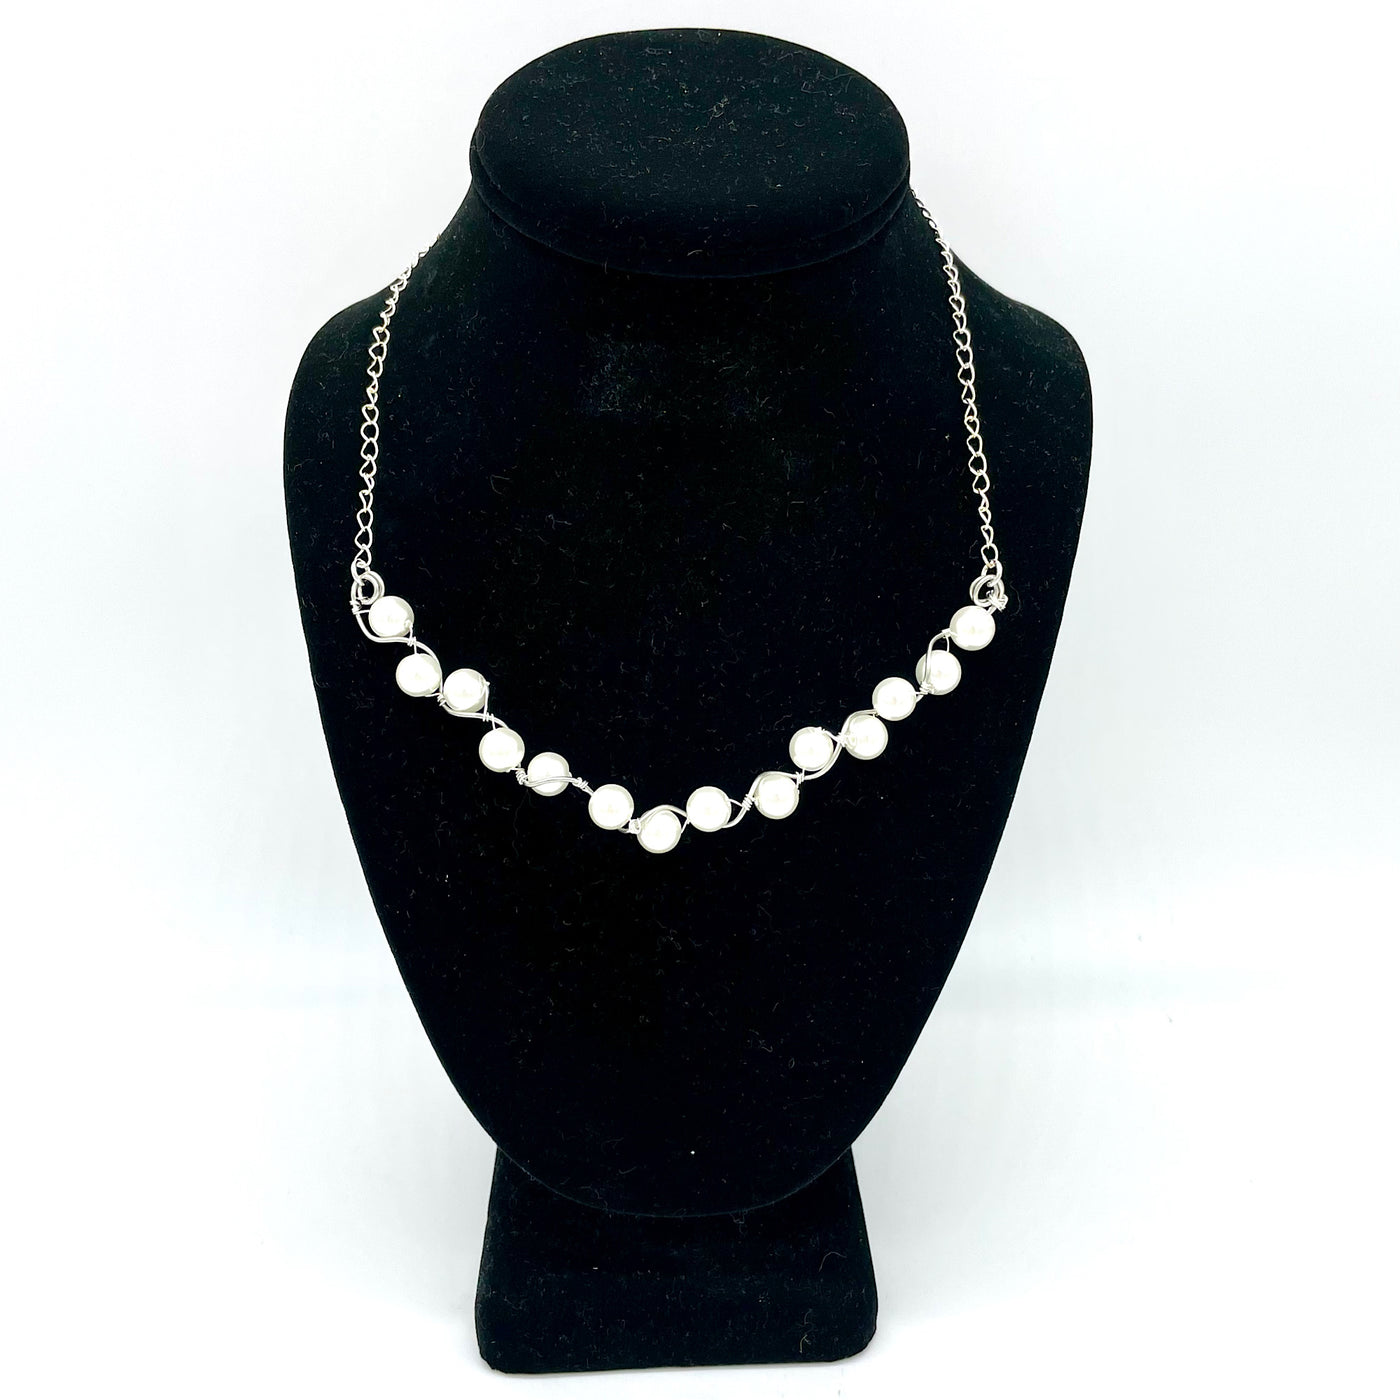 Handcrafted Entwined Pearl Necklace